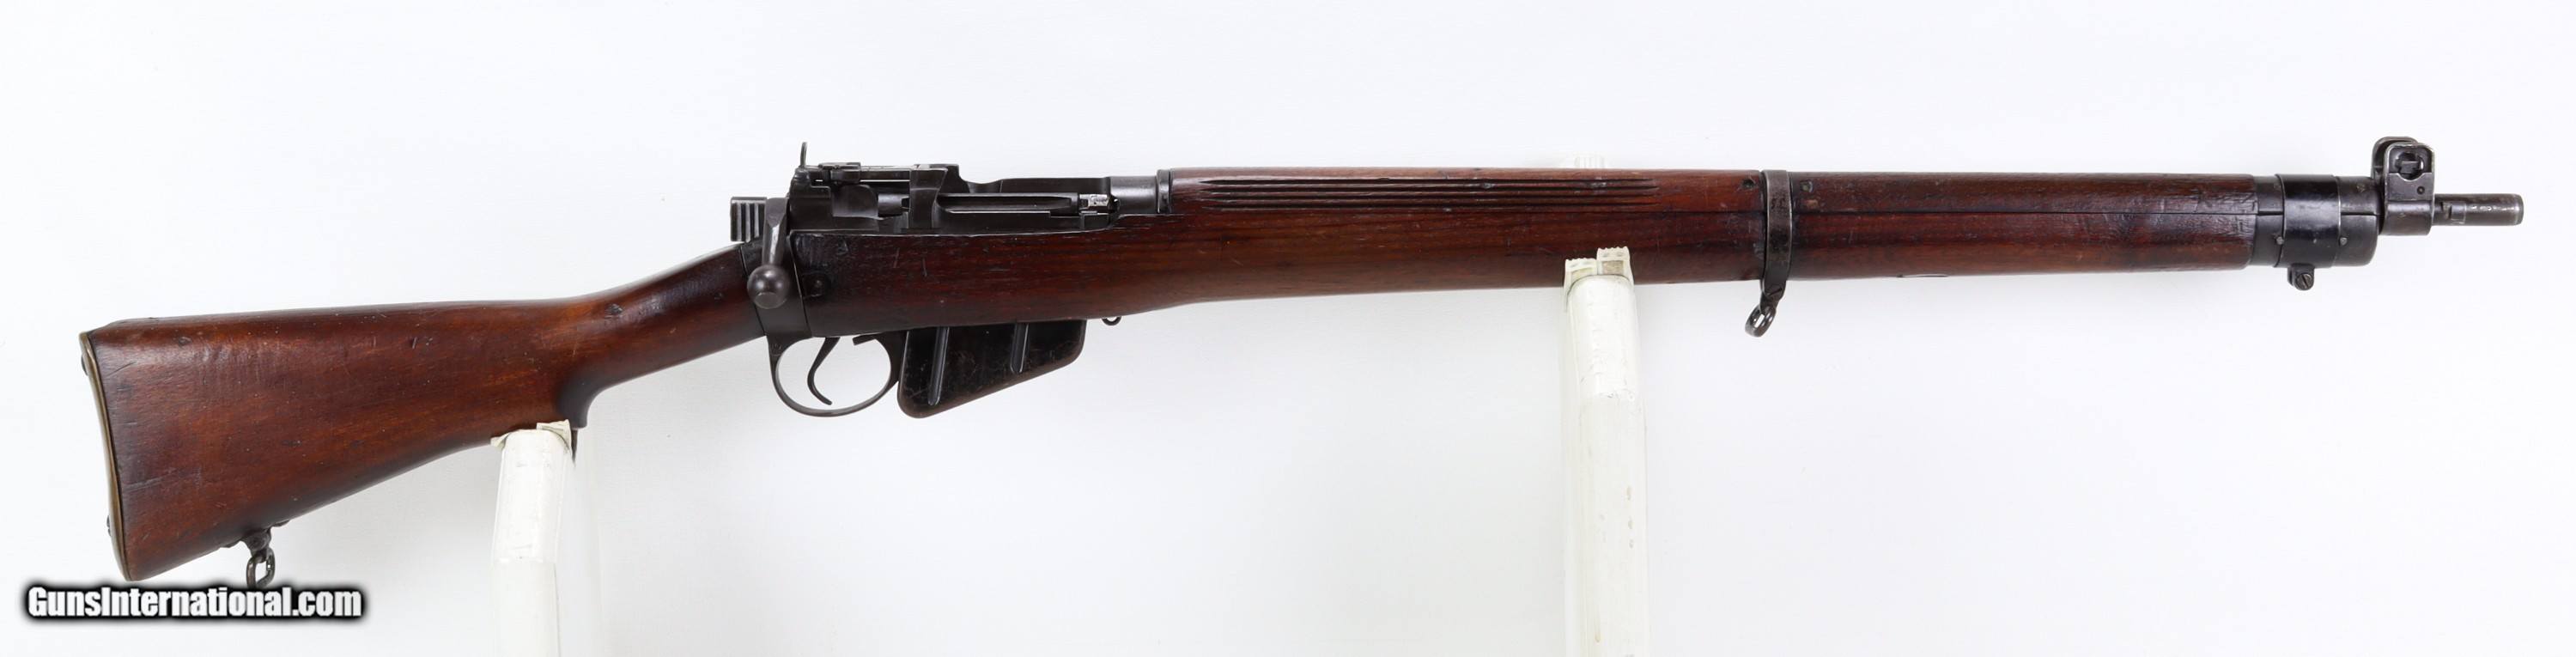 Lee-Enfield No.4 MK1 Bolt Action Rifle .303 British (1942) U.S. PROPERTY -  MADE BY SAVAGE for sale